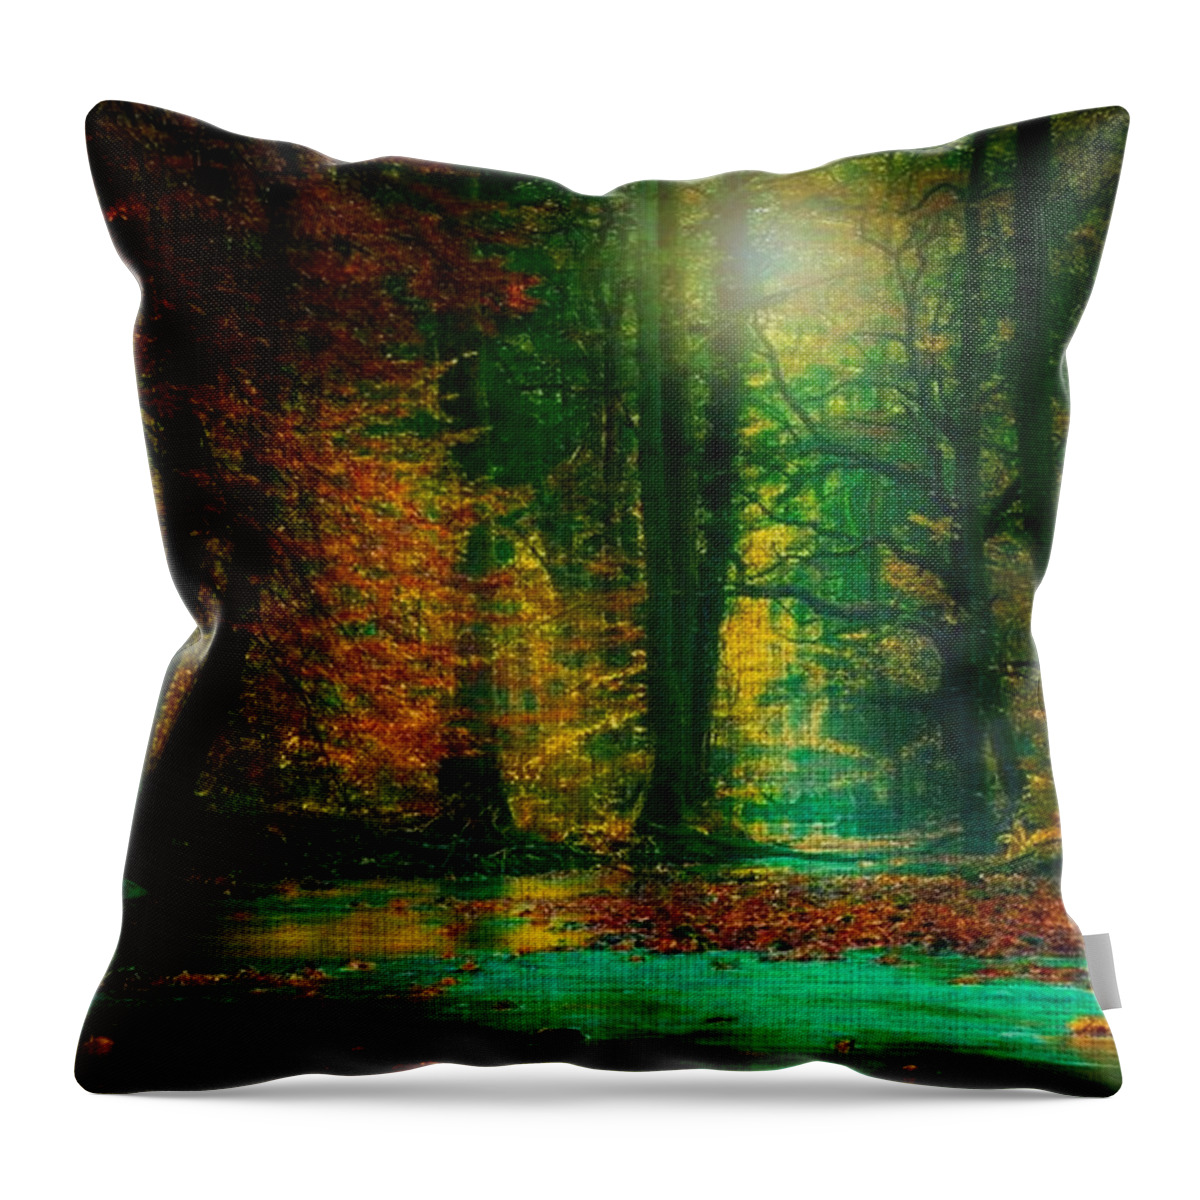 Magical Throw Pillow featuring the digital art Magical Forest by Digital Art Cafe